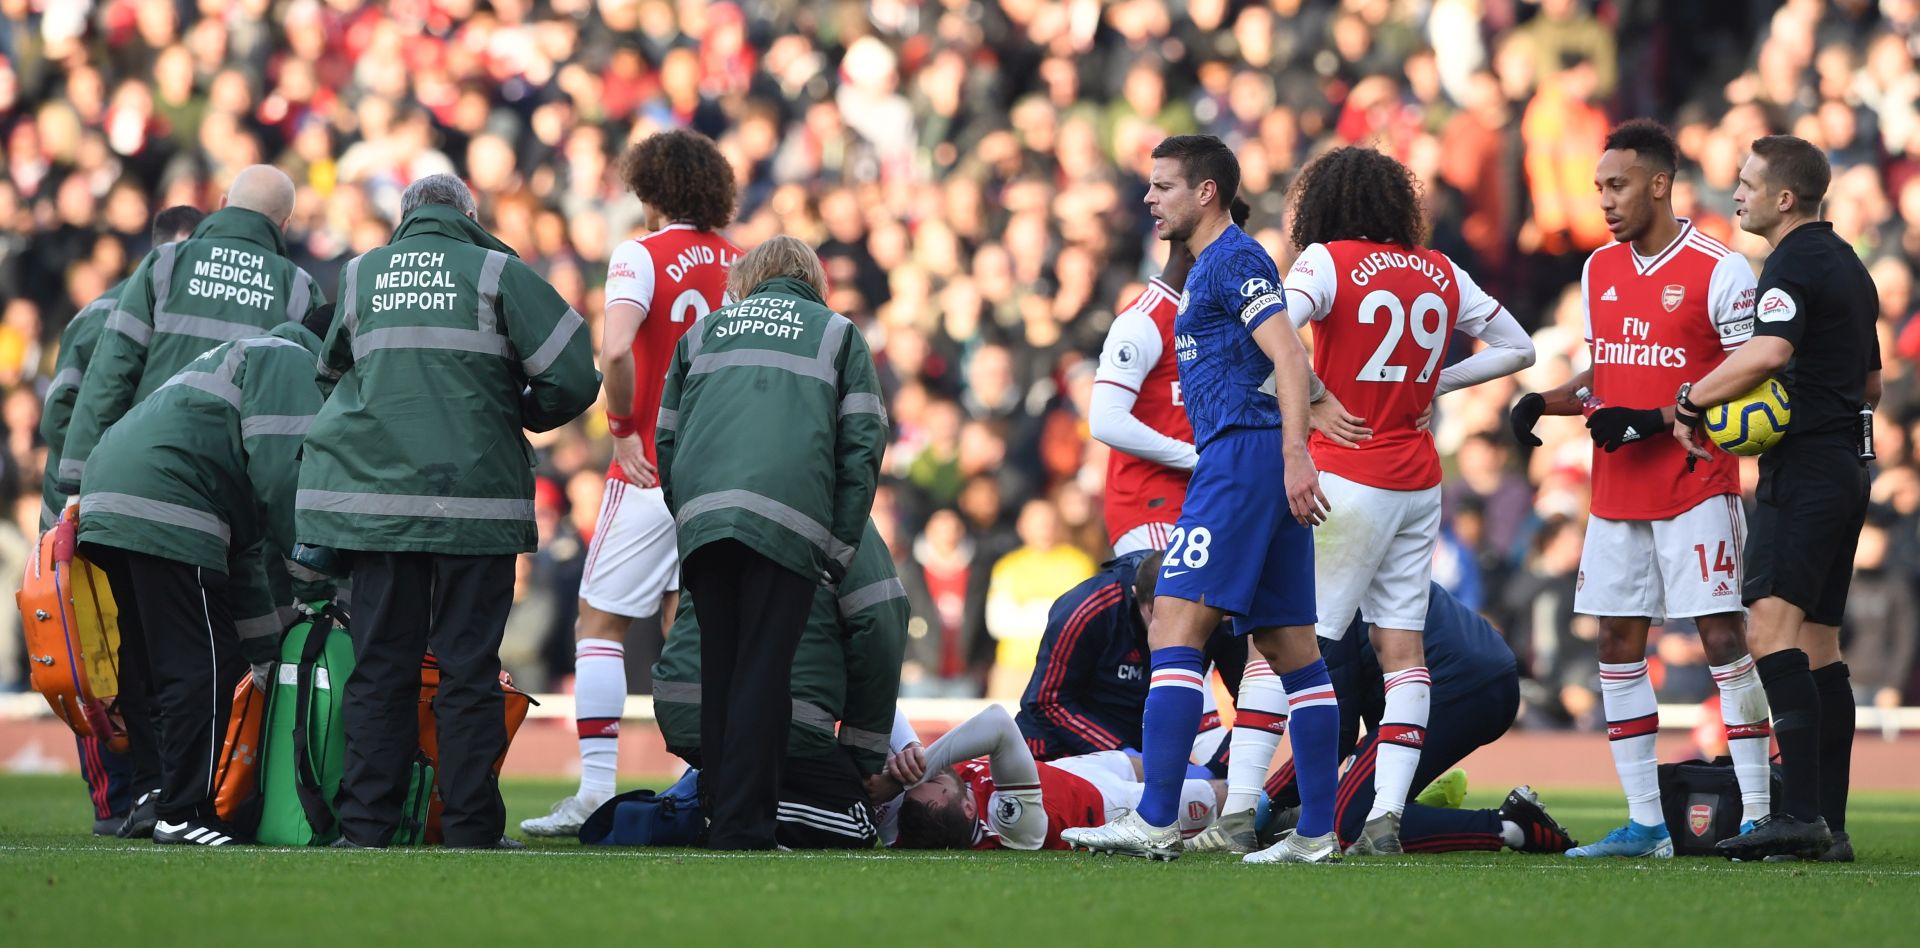 epa08093779 Arsenal's Calum Chambers (C, down) reacts in pain during the English Premier League soccer match between Arsenal FC and Chelsea FC held at the Emirates stadium in London, Britain, 29 December 2019.  EPA/NEIL HALL EDITORIAL USE ONLY.  No use with unauthorized audio, video, data, fixture lists, club/league logos or 'live' services. Online in-match use limited to 120 images, no video emulation. No use in betting, games or single club/league/player publications.